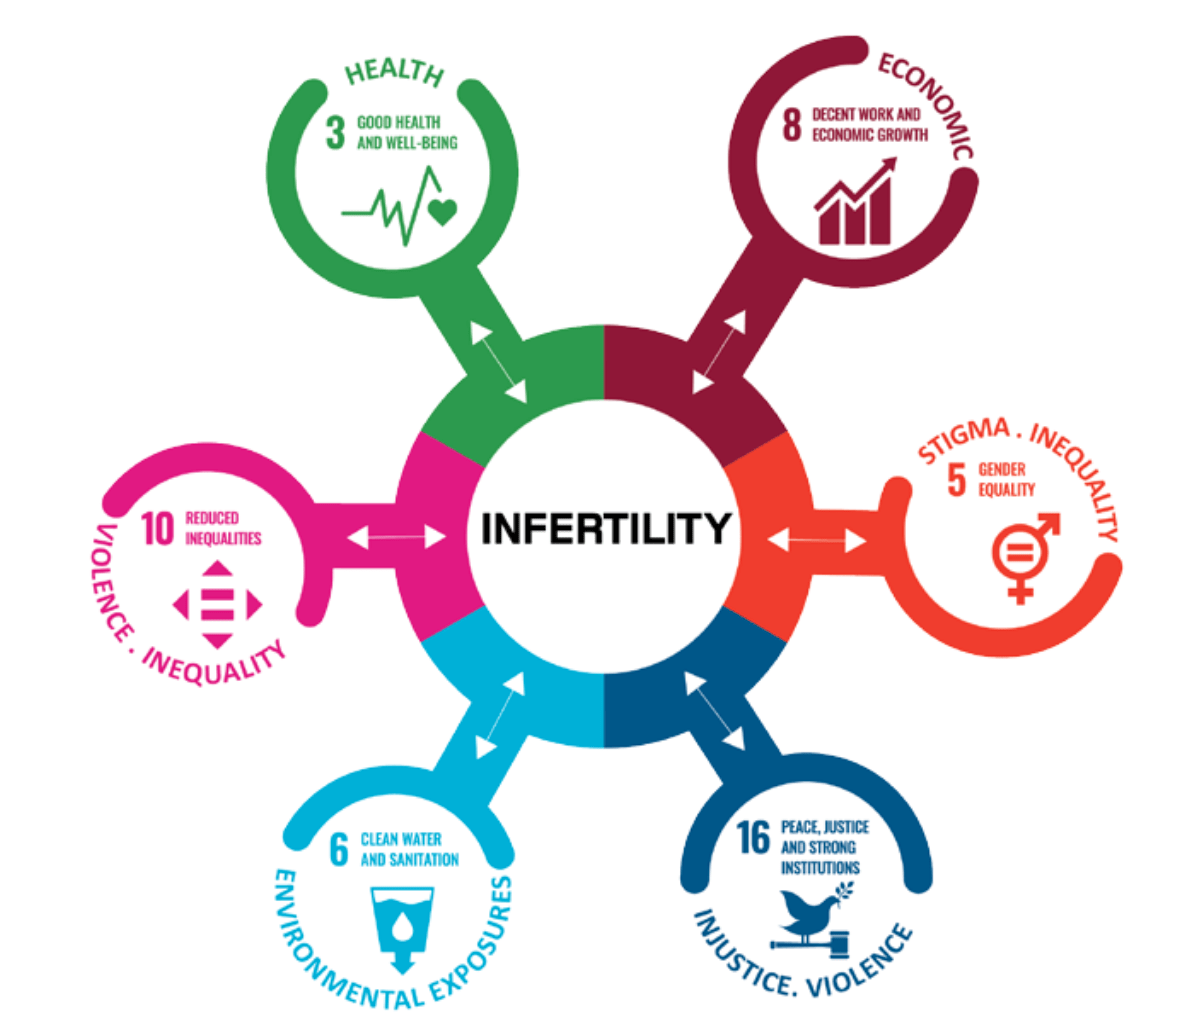 Breaking the silence around infertility: a scoping review of interventions addressing infertility-related gendered stigmatisation in low- and middle-income countries